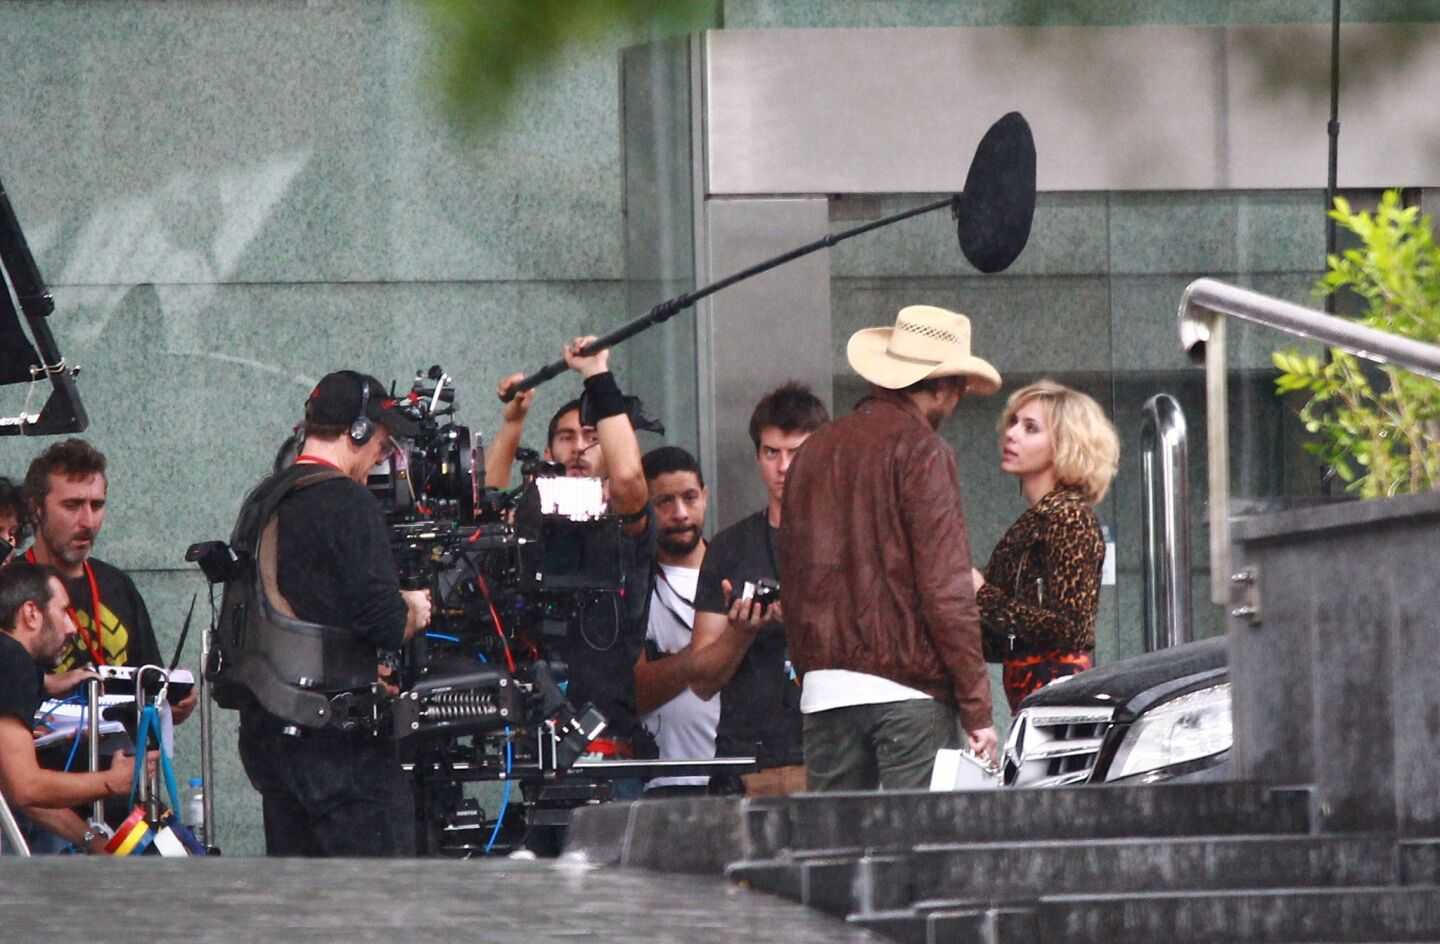 Scarlett Johansson filming a scene for her new movie, "Lucy" on Oct. 21, 2013, in Taipei, China.